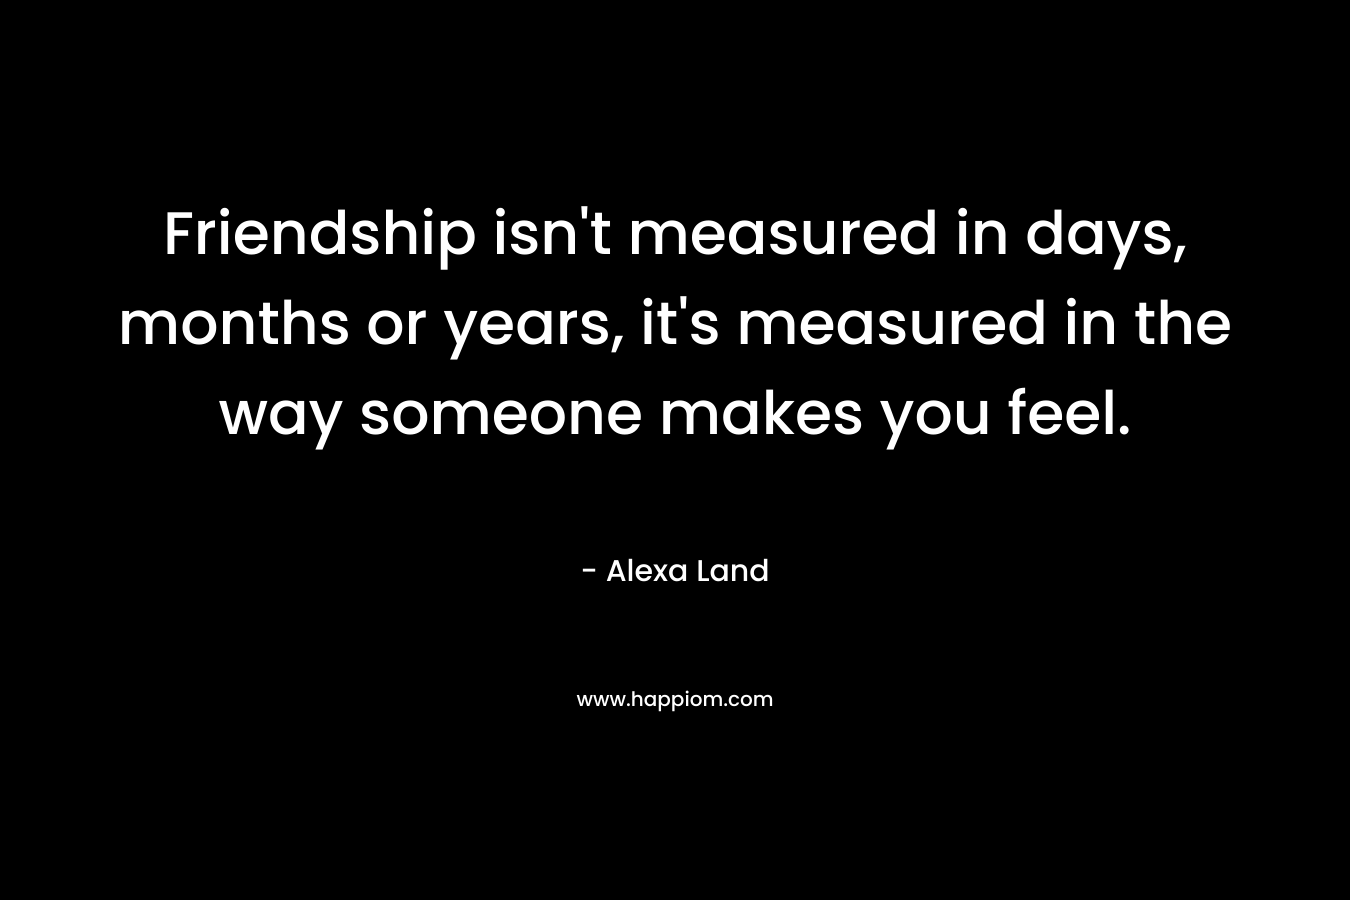 Friendship isn't measured in days, months or years, it's measured in the way someone makes you feel.